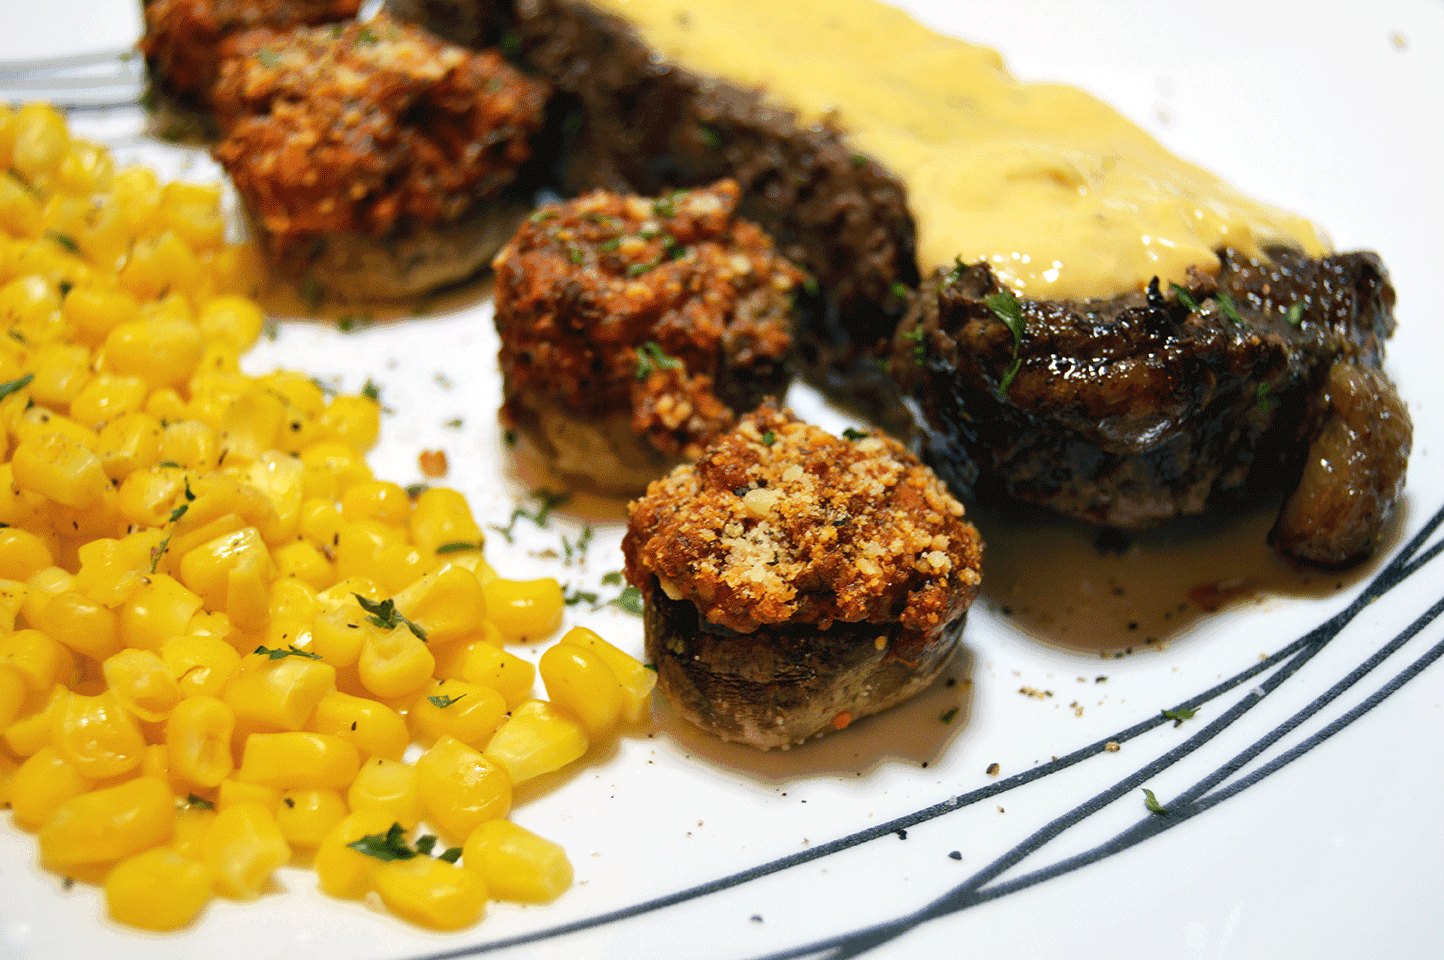 stuffed mushrooms on a plate with steak and corn